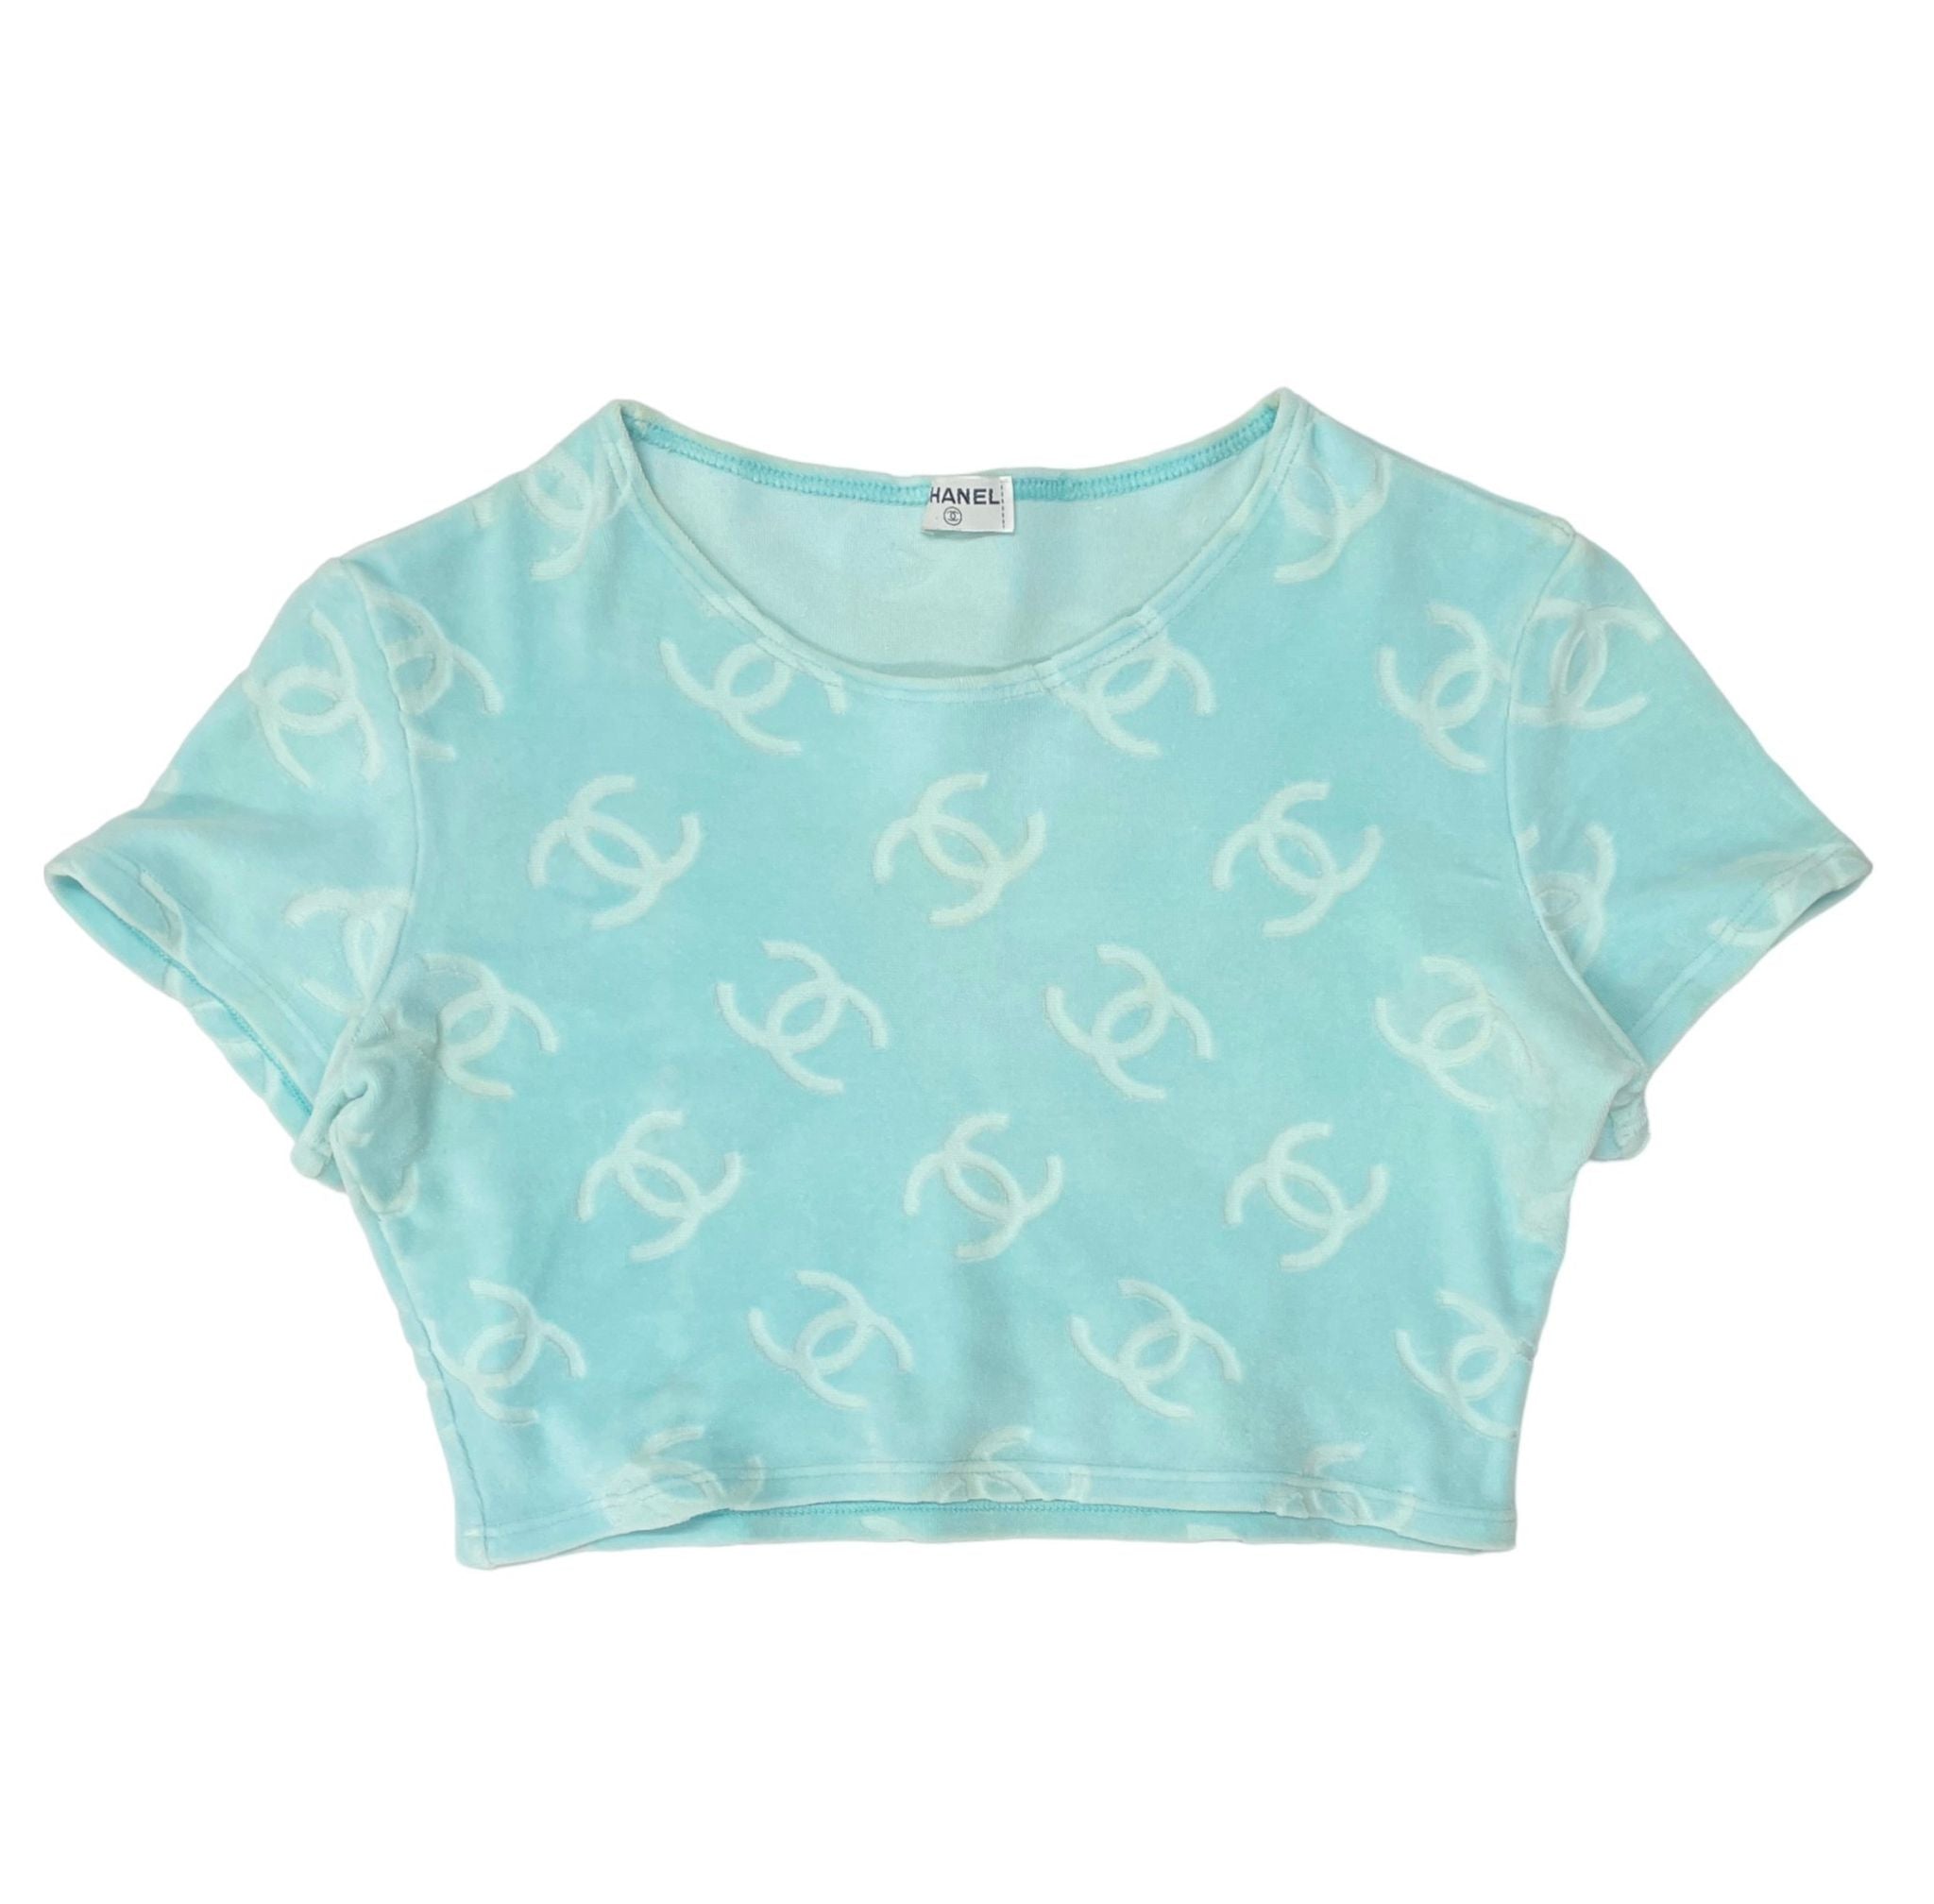 Chanel Top for women  Buy or Sell your Elegant clothing